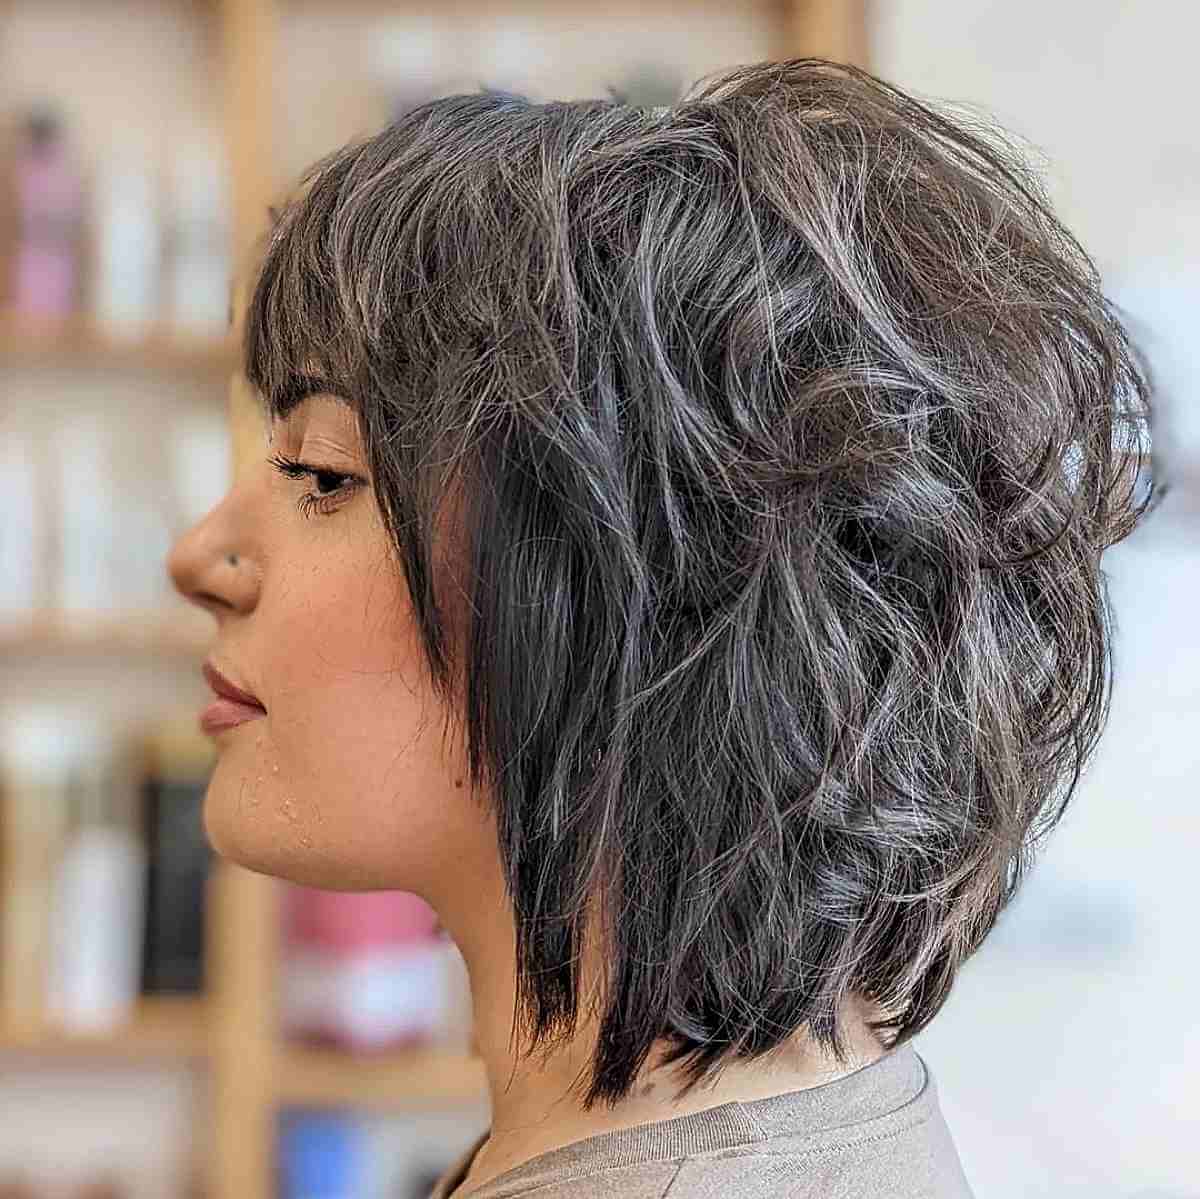 20 Short Haircuts for Thick Hair to Look Voluminous - Short Hairstyless